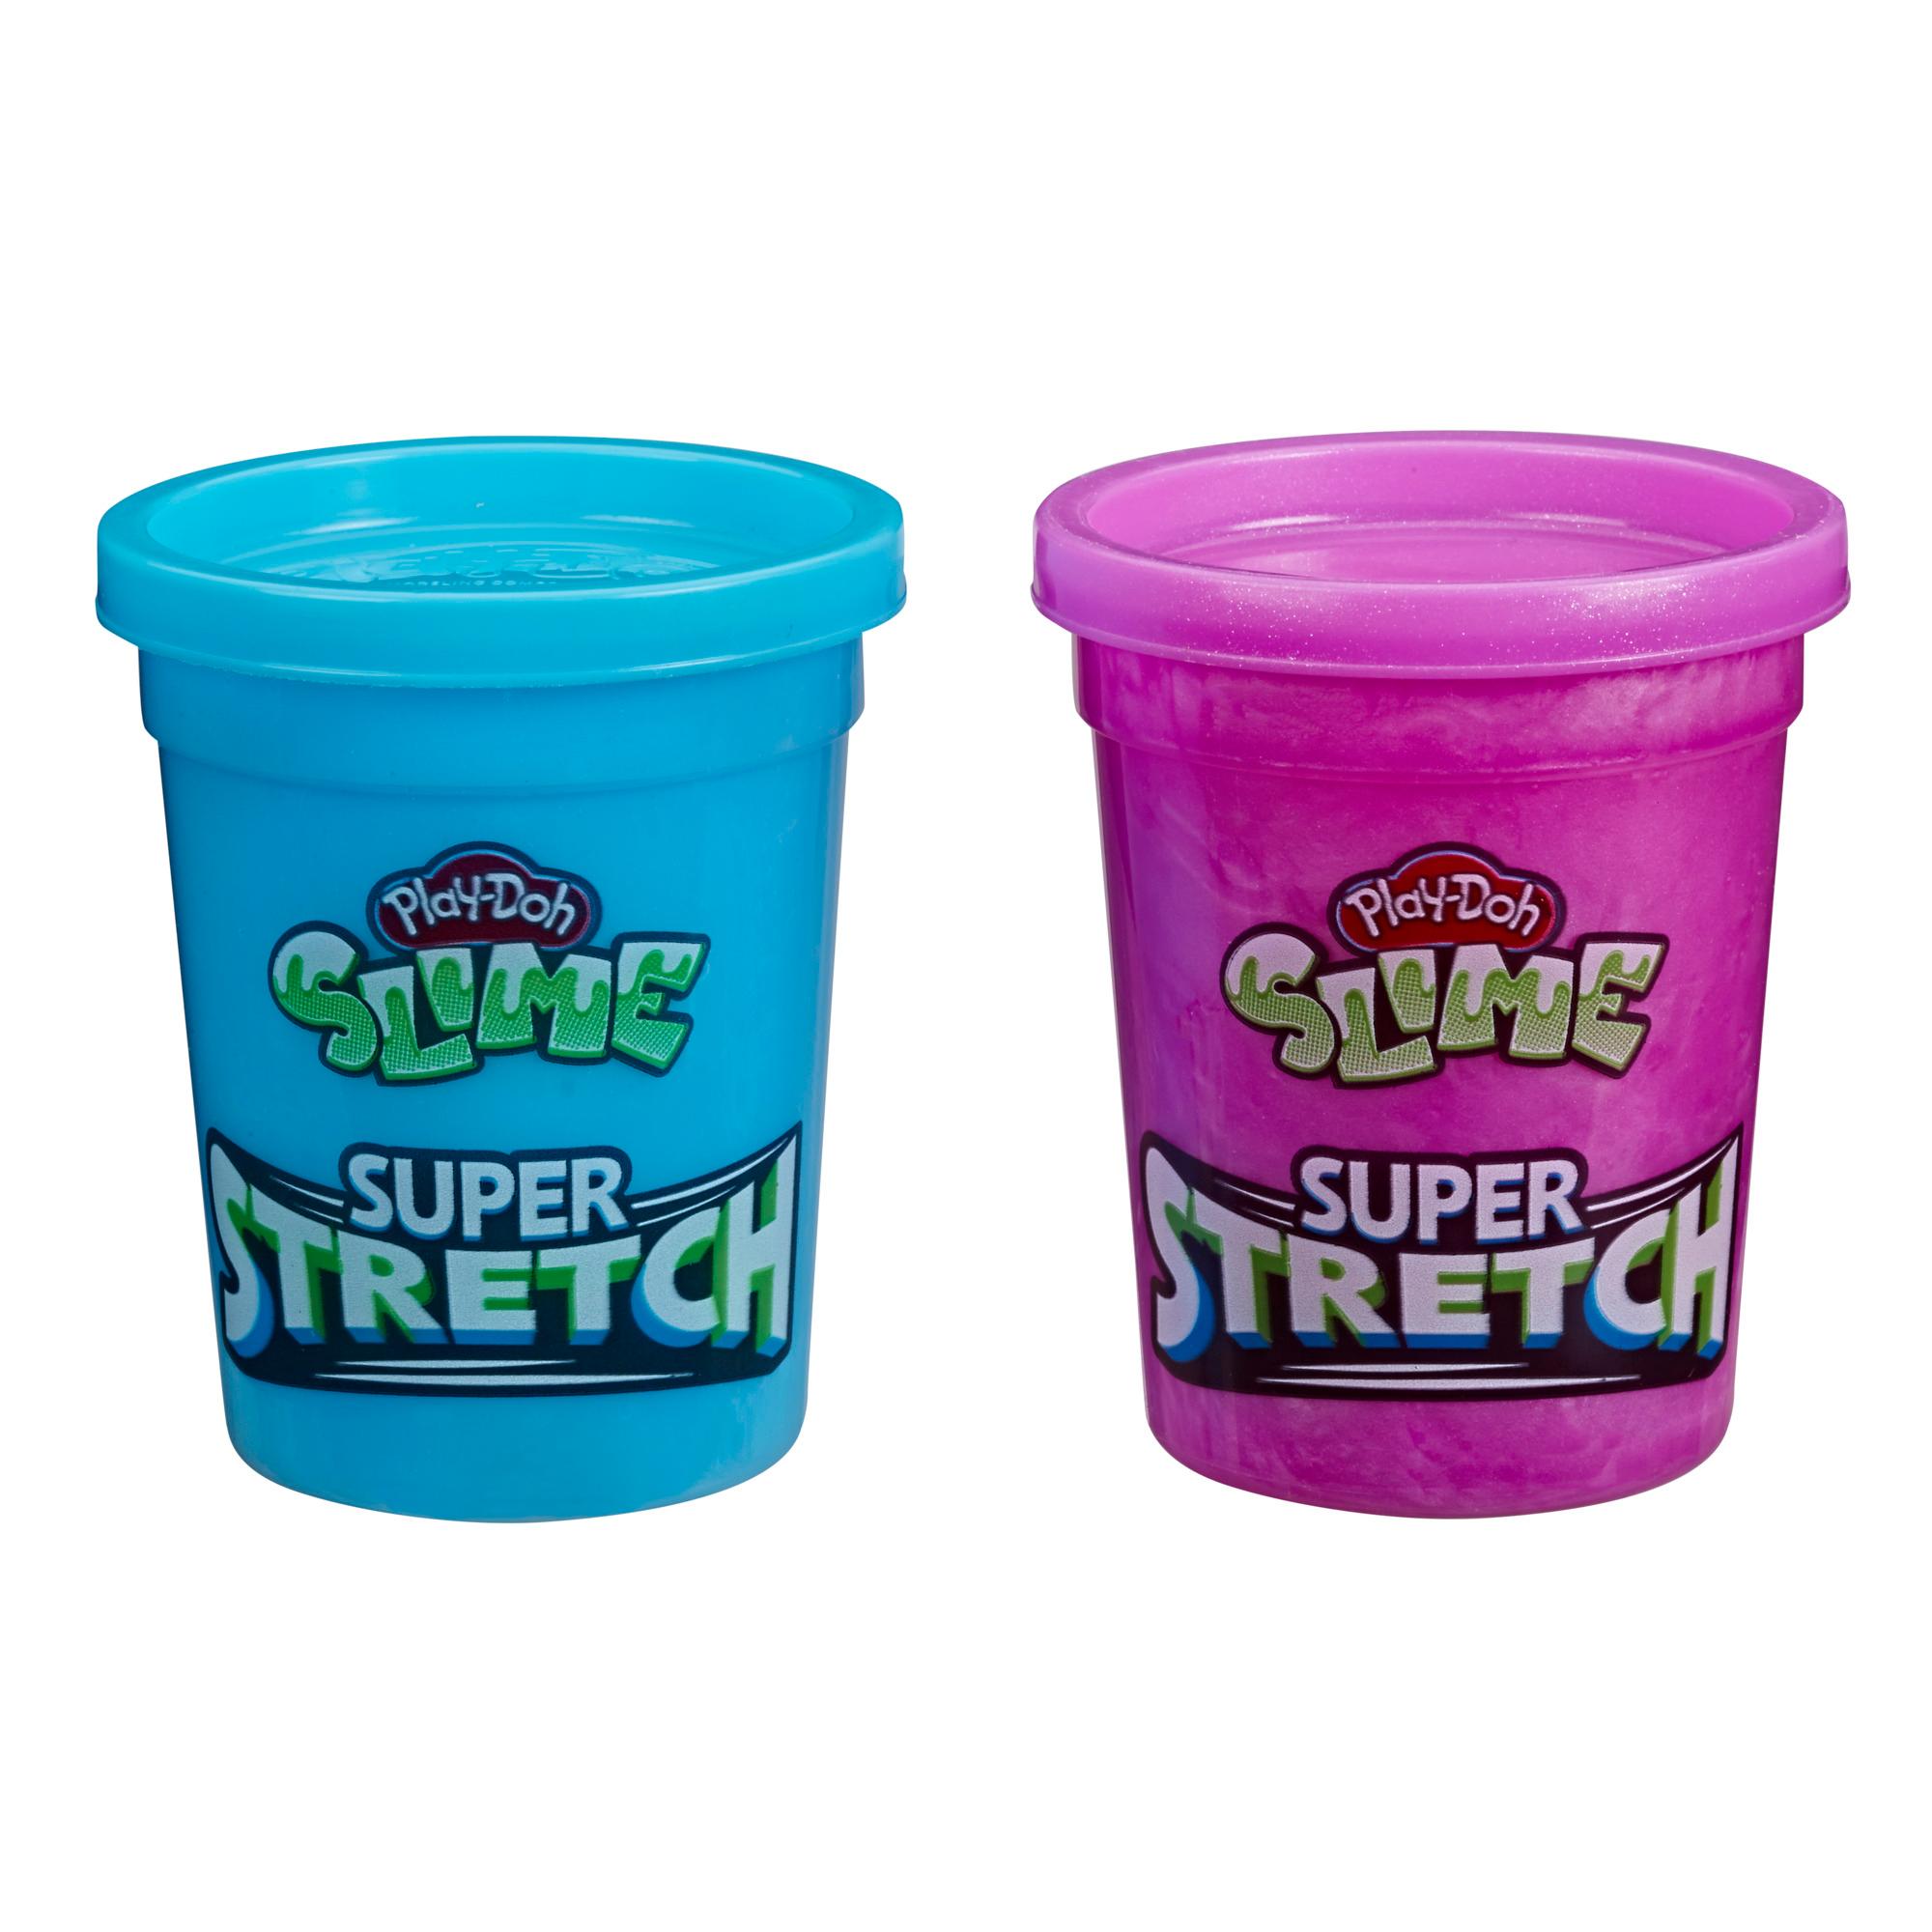 Play-Doh Slime Super Stretch 2-Pack Assortment